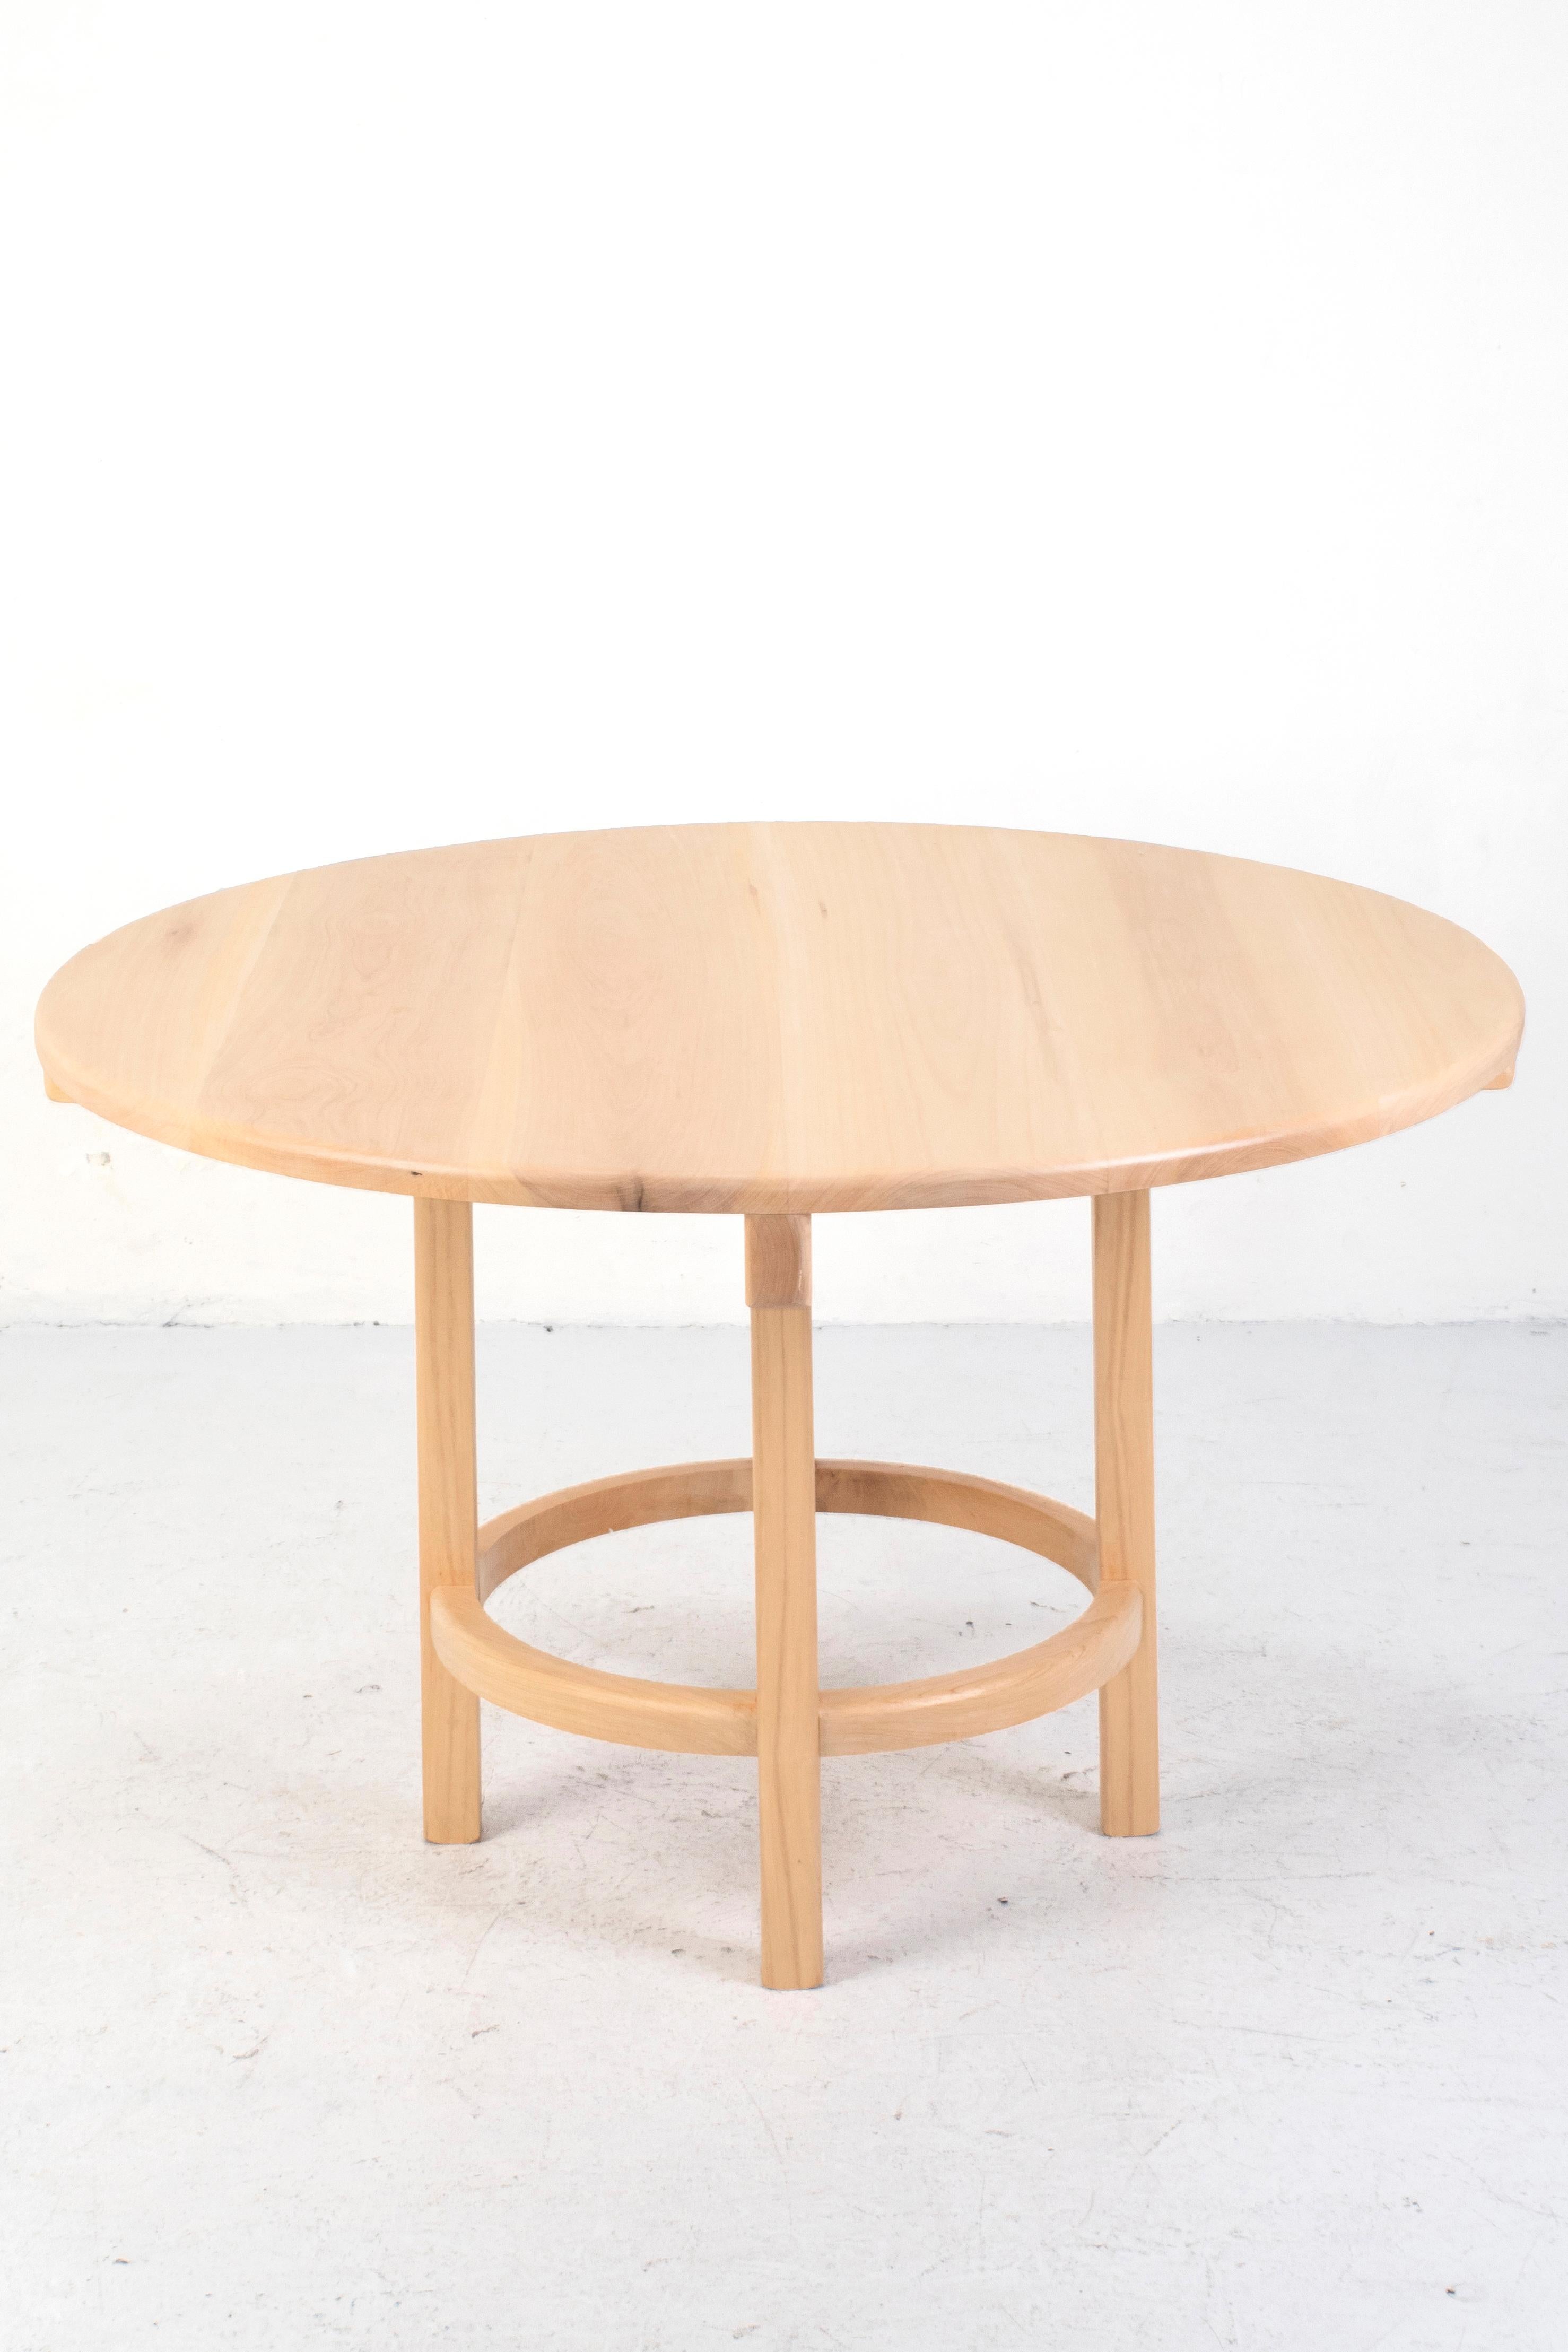 Modern Orno Round Dining Table by Ries